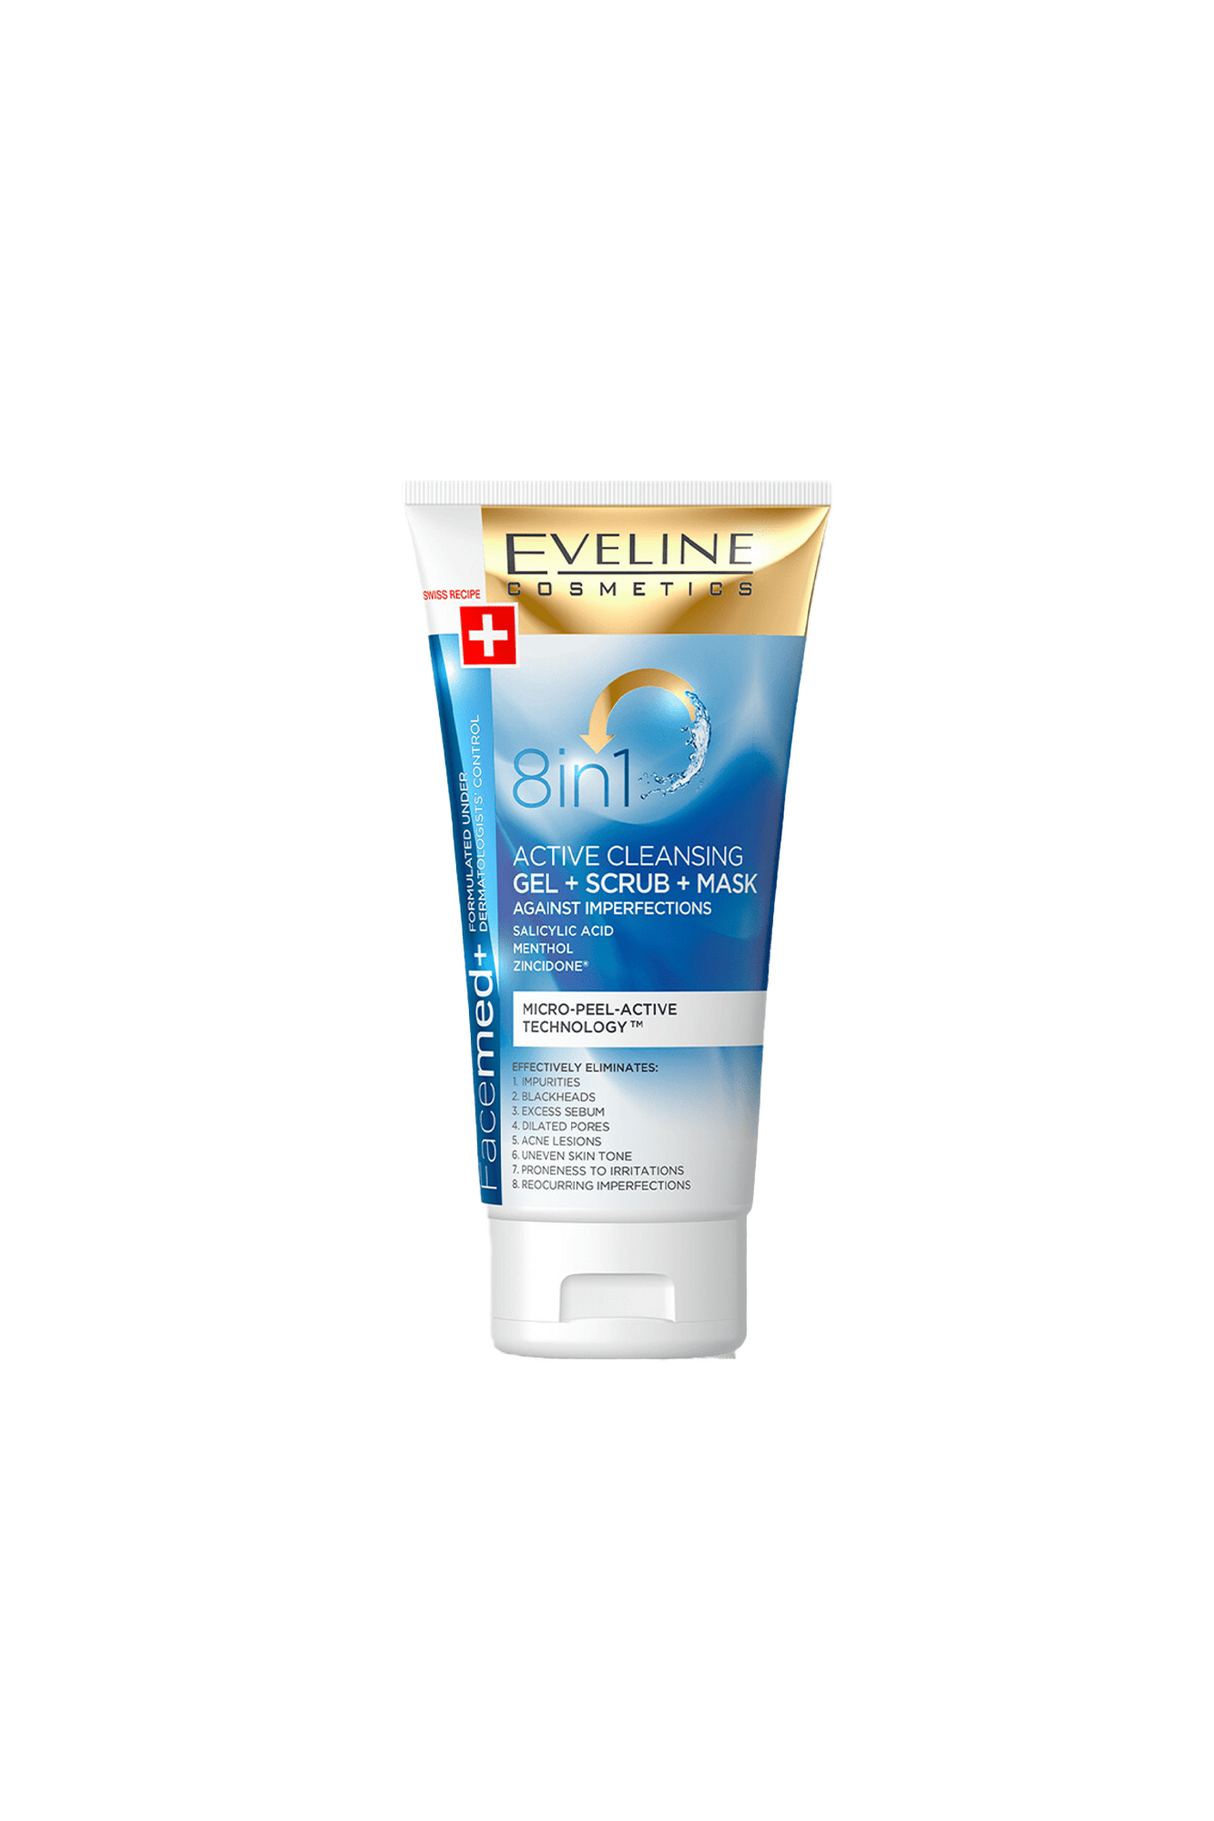 eveline face wash active 8in1 150ml